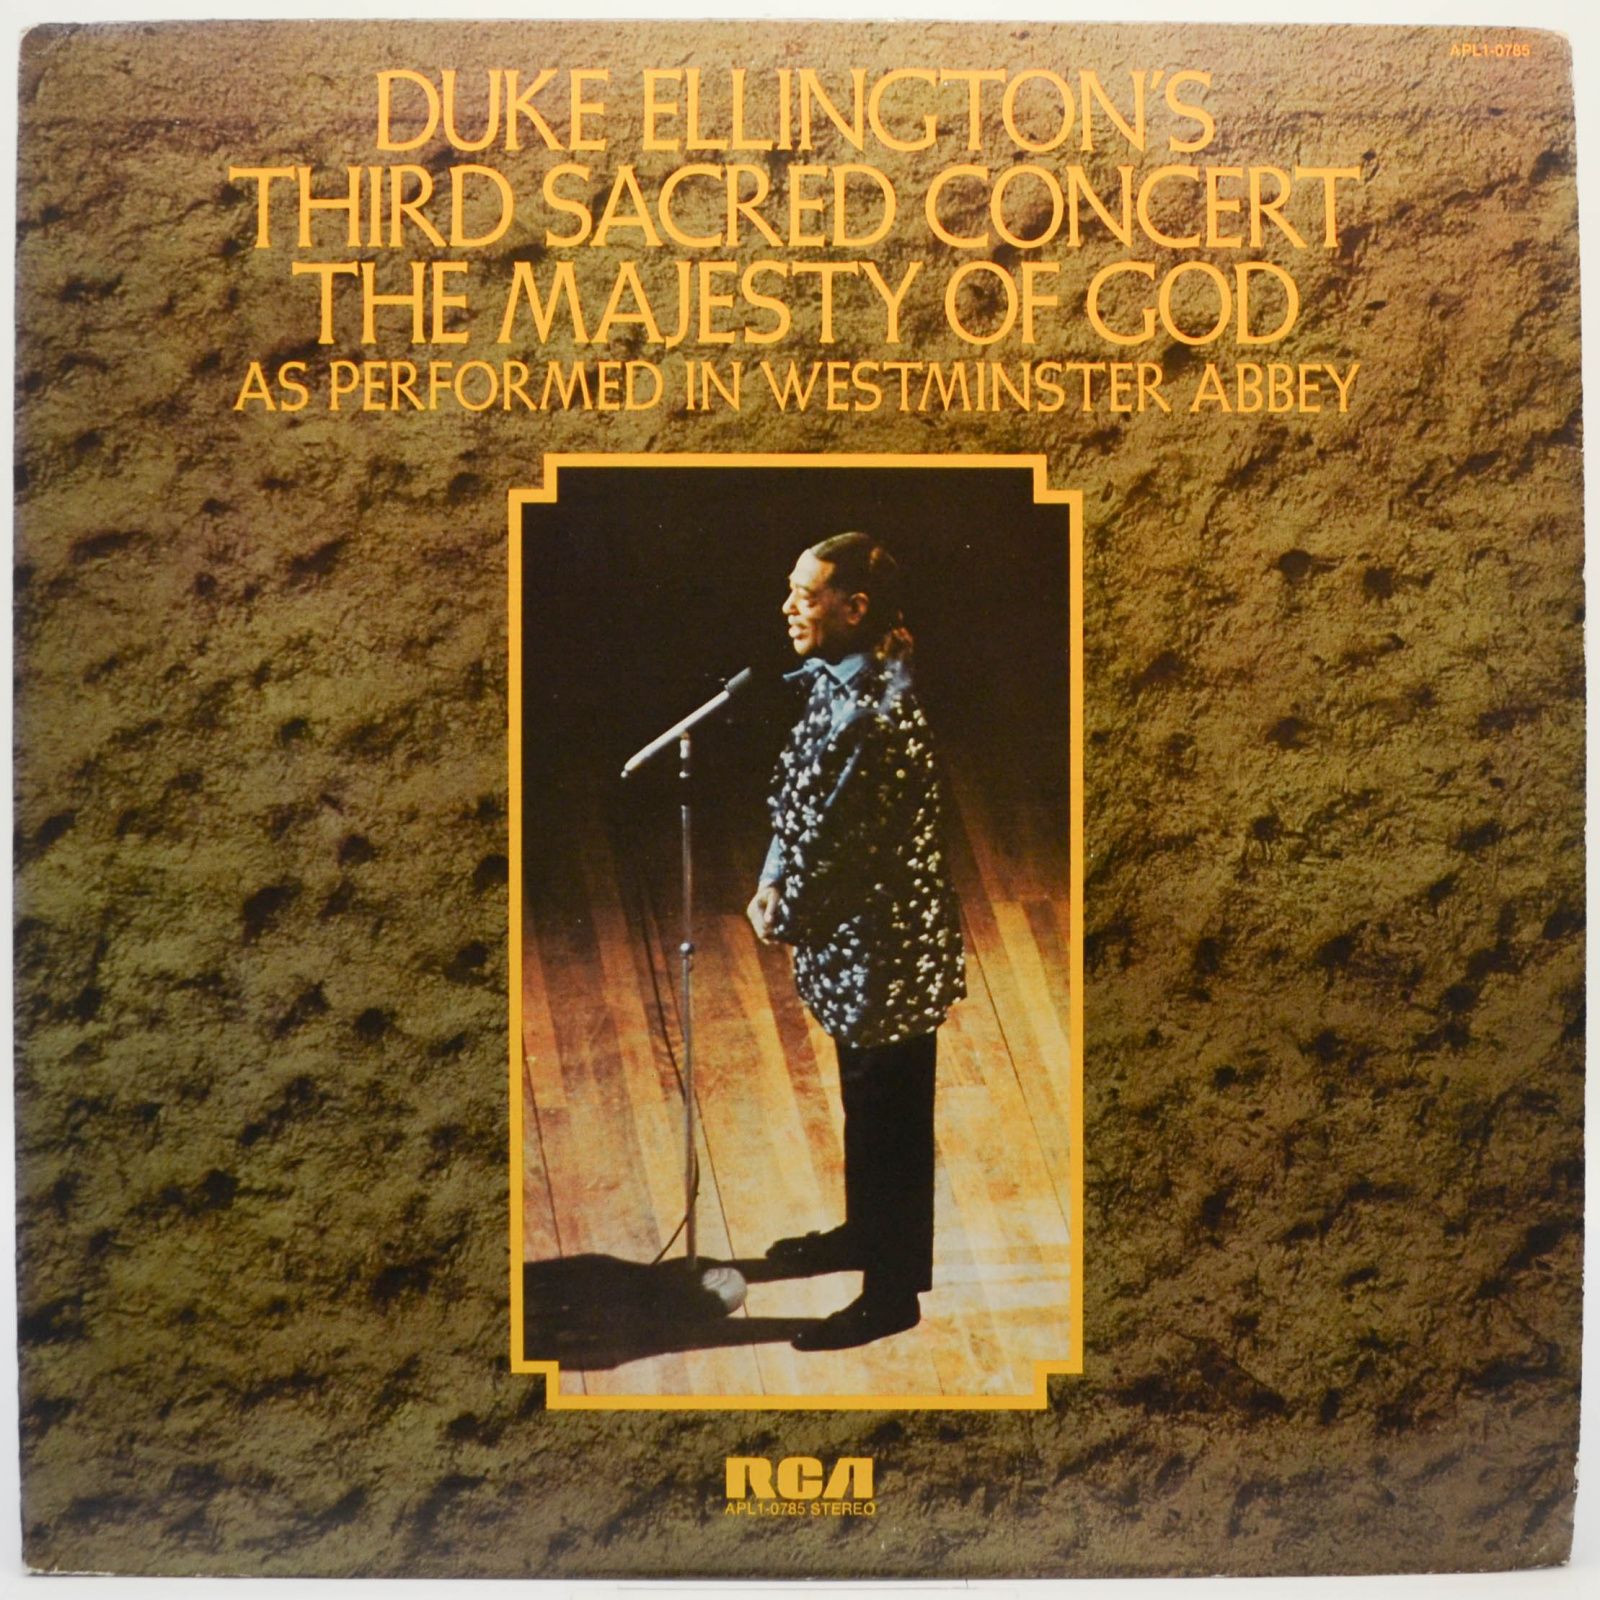 Duke Ellington's Third Sacred Concert, The Majesty Of God, As Performed In Westminster Abbey, 1975